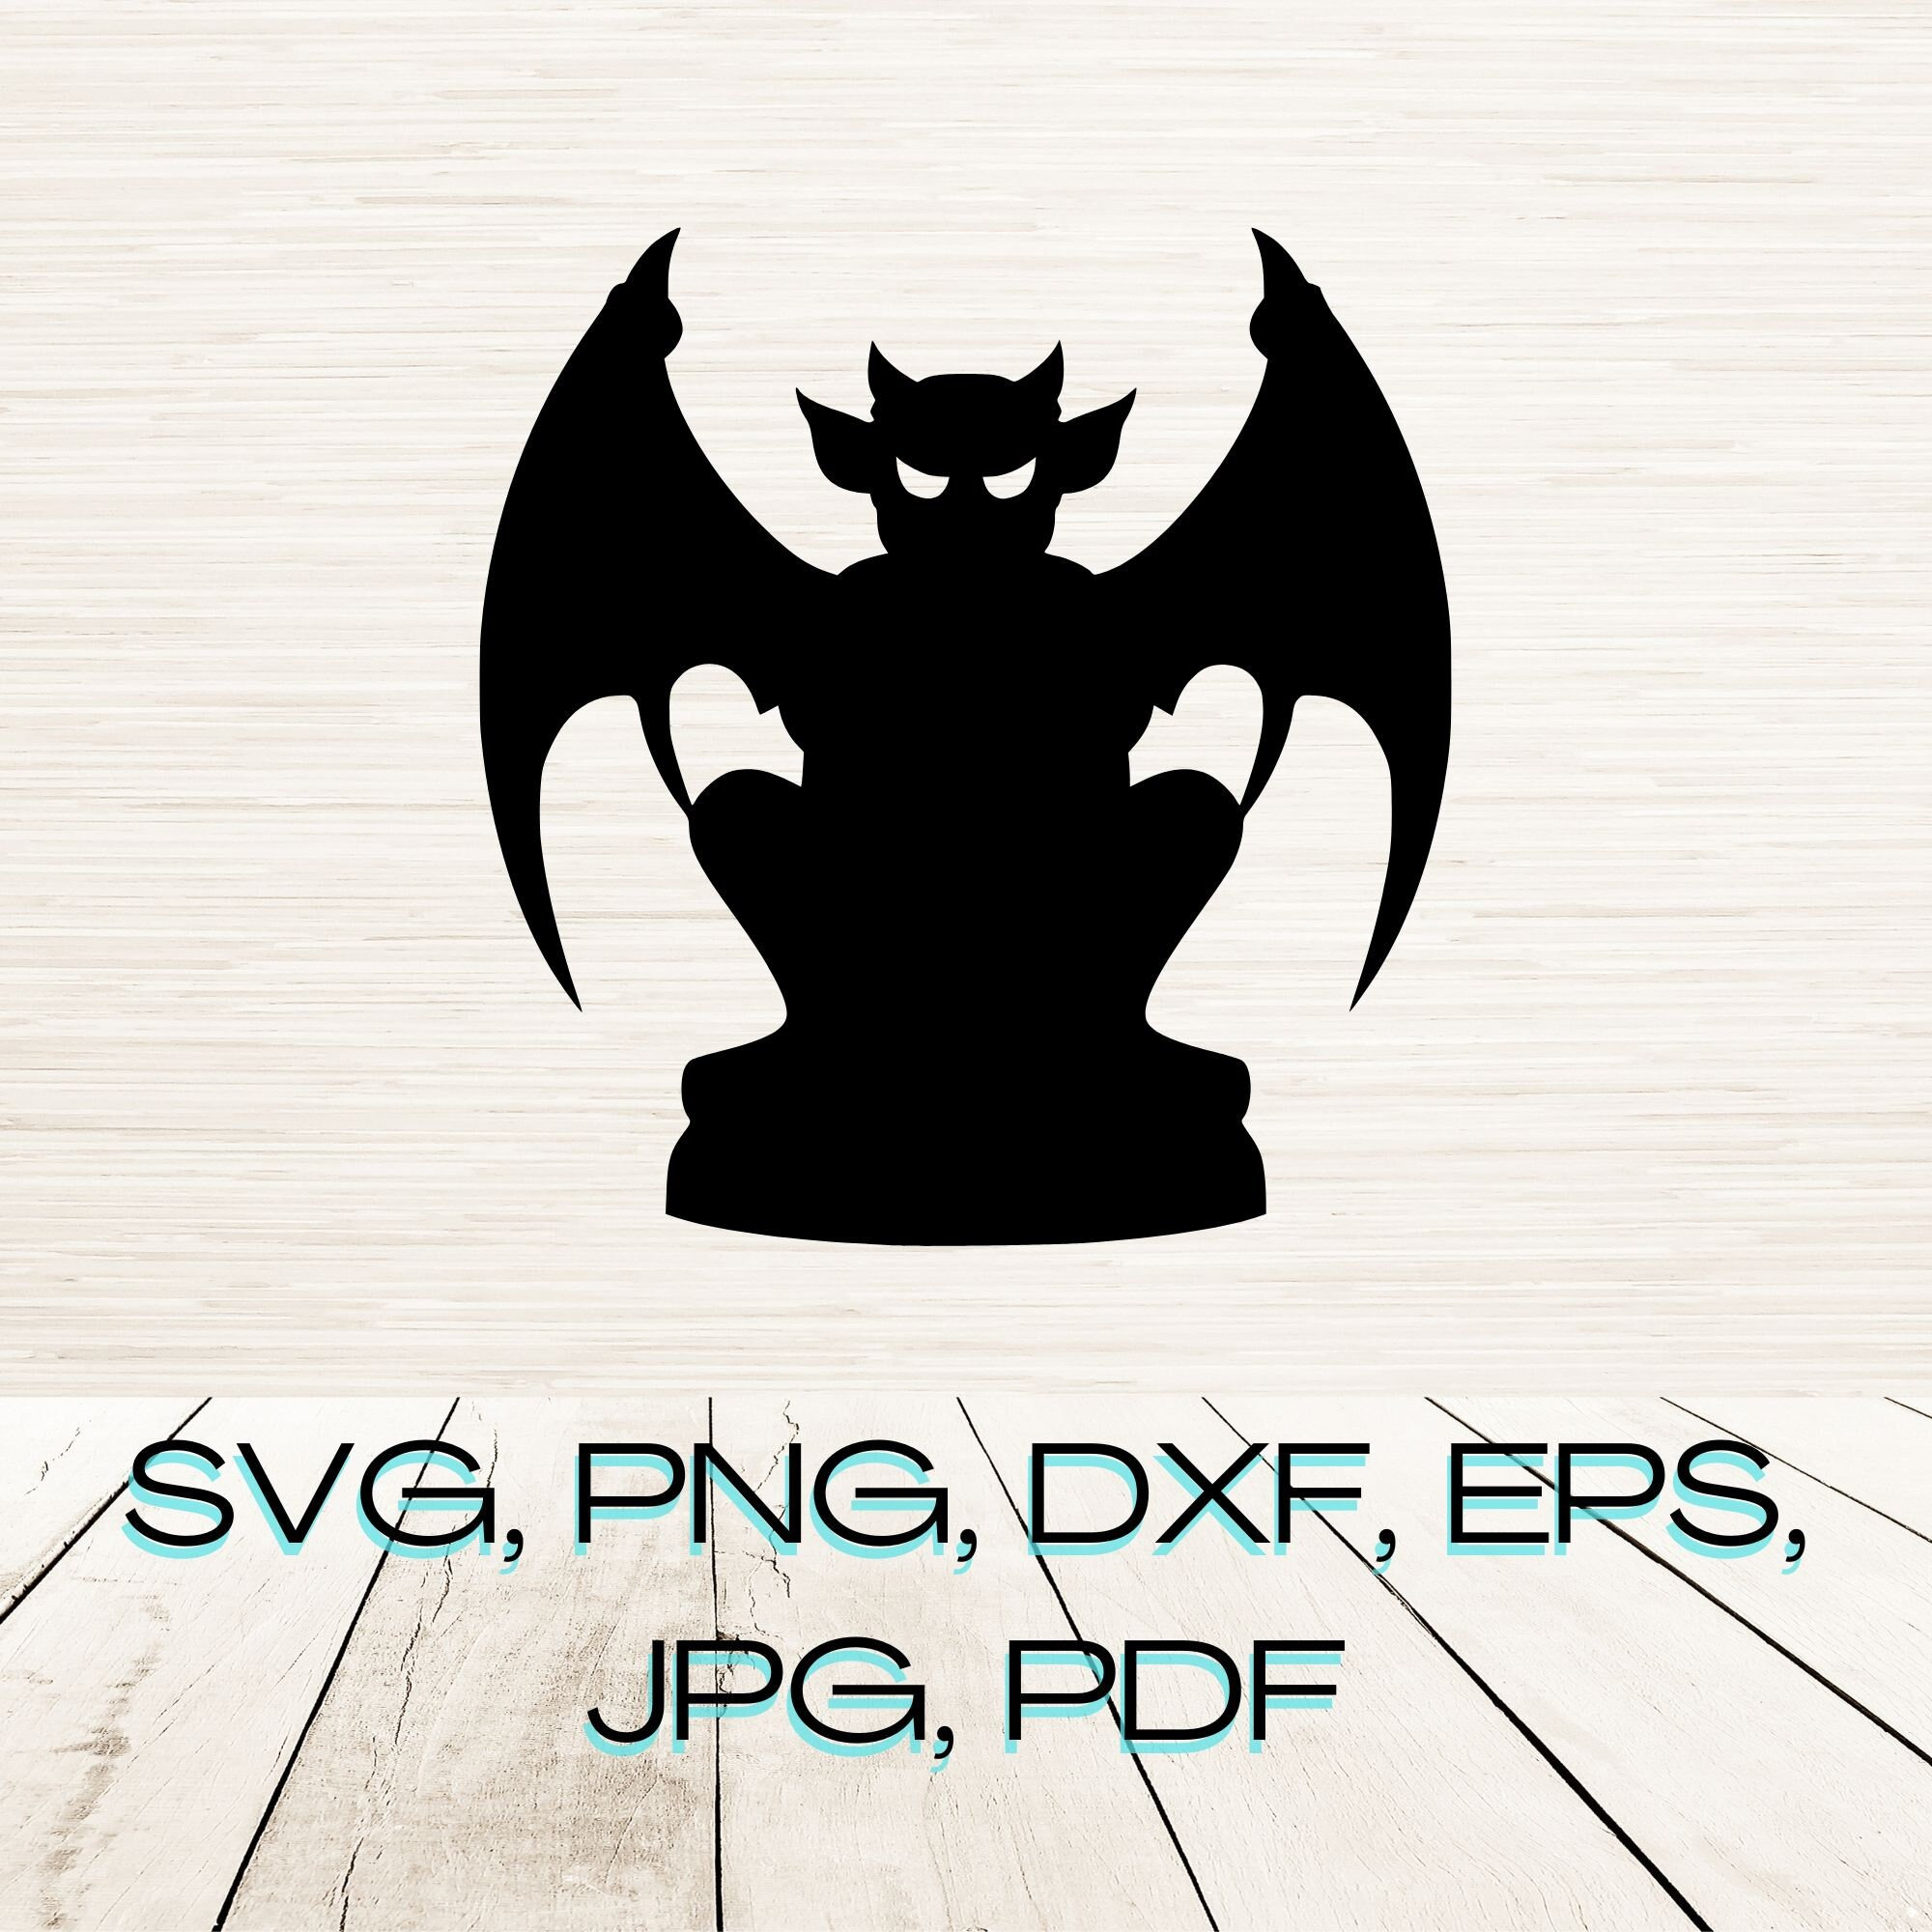 Ancient Medieval Fantasy Evil Characters Creatures Monsters Folklore  Gargoyle Legend Troll Monsters Creature Instant Download PNG SVG Vector 